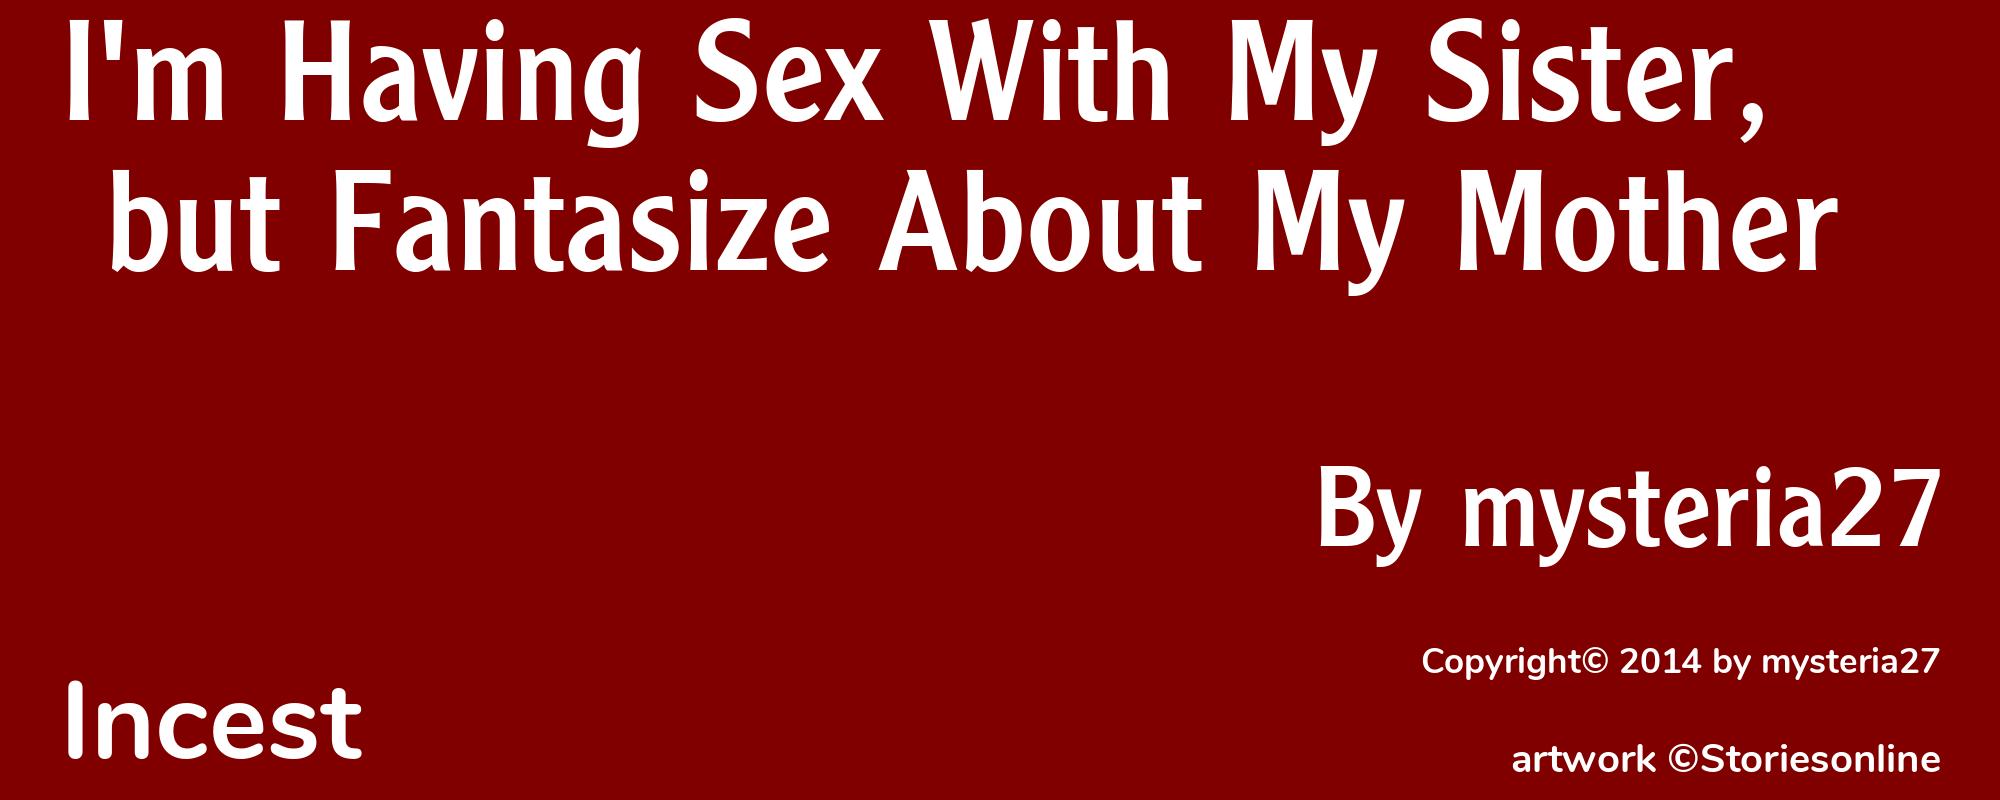 I'm Having Sex With My Sister, but Fantasize About My Mother - Cover